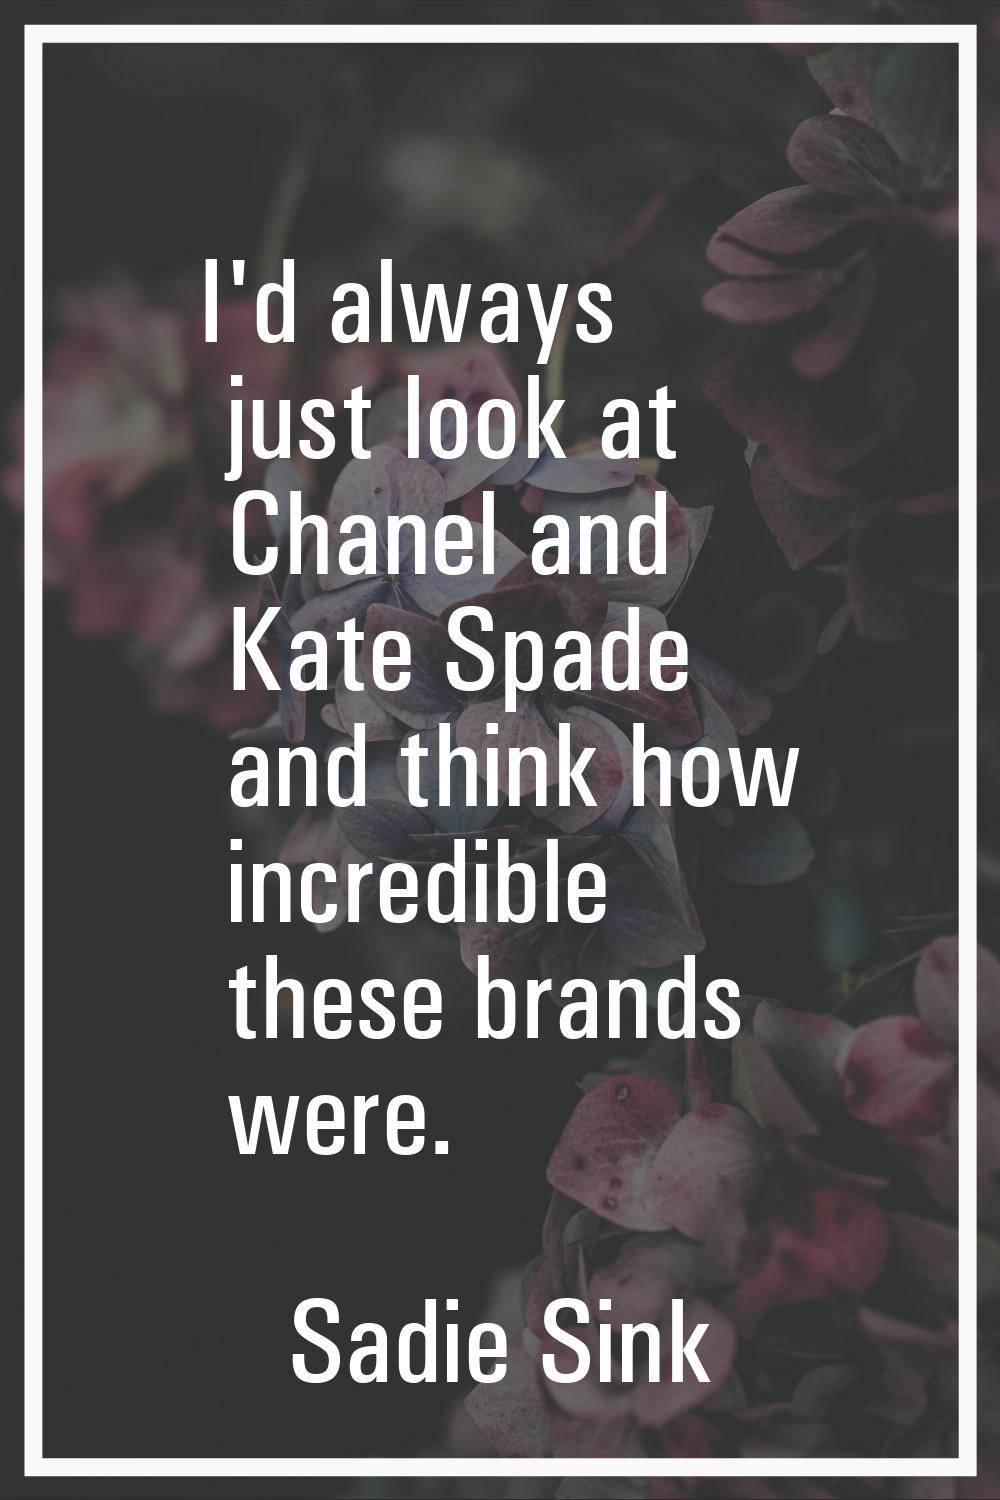 I'd always just look at Chanel and Kate Spade and think how incredible these brands were.